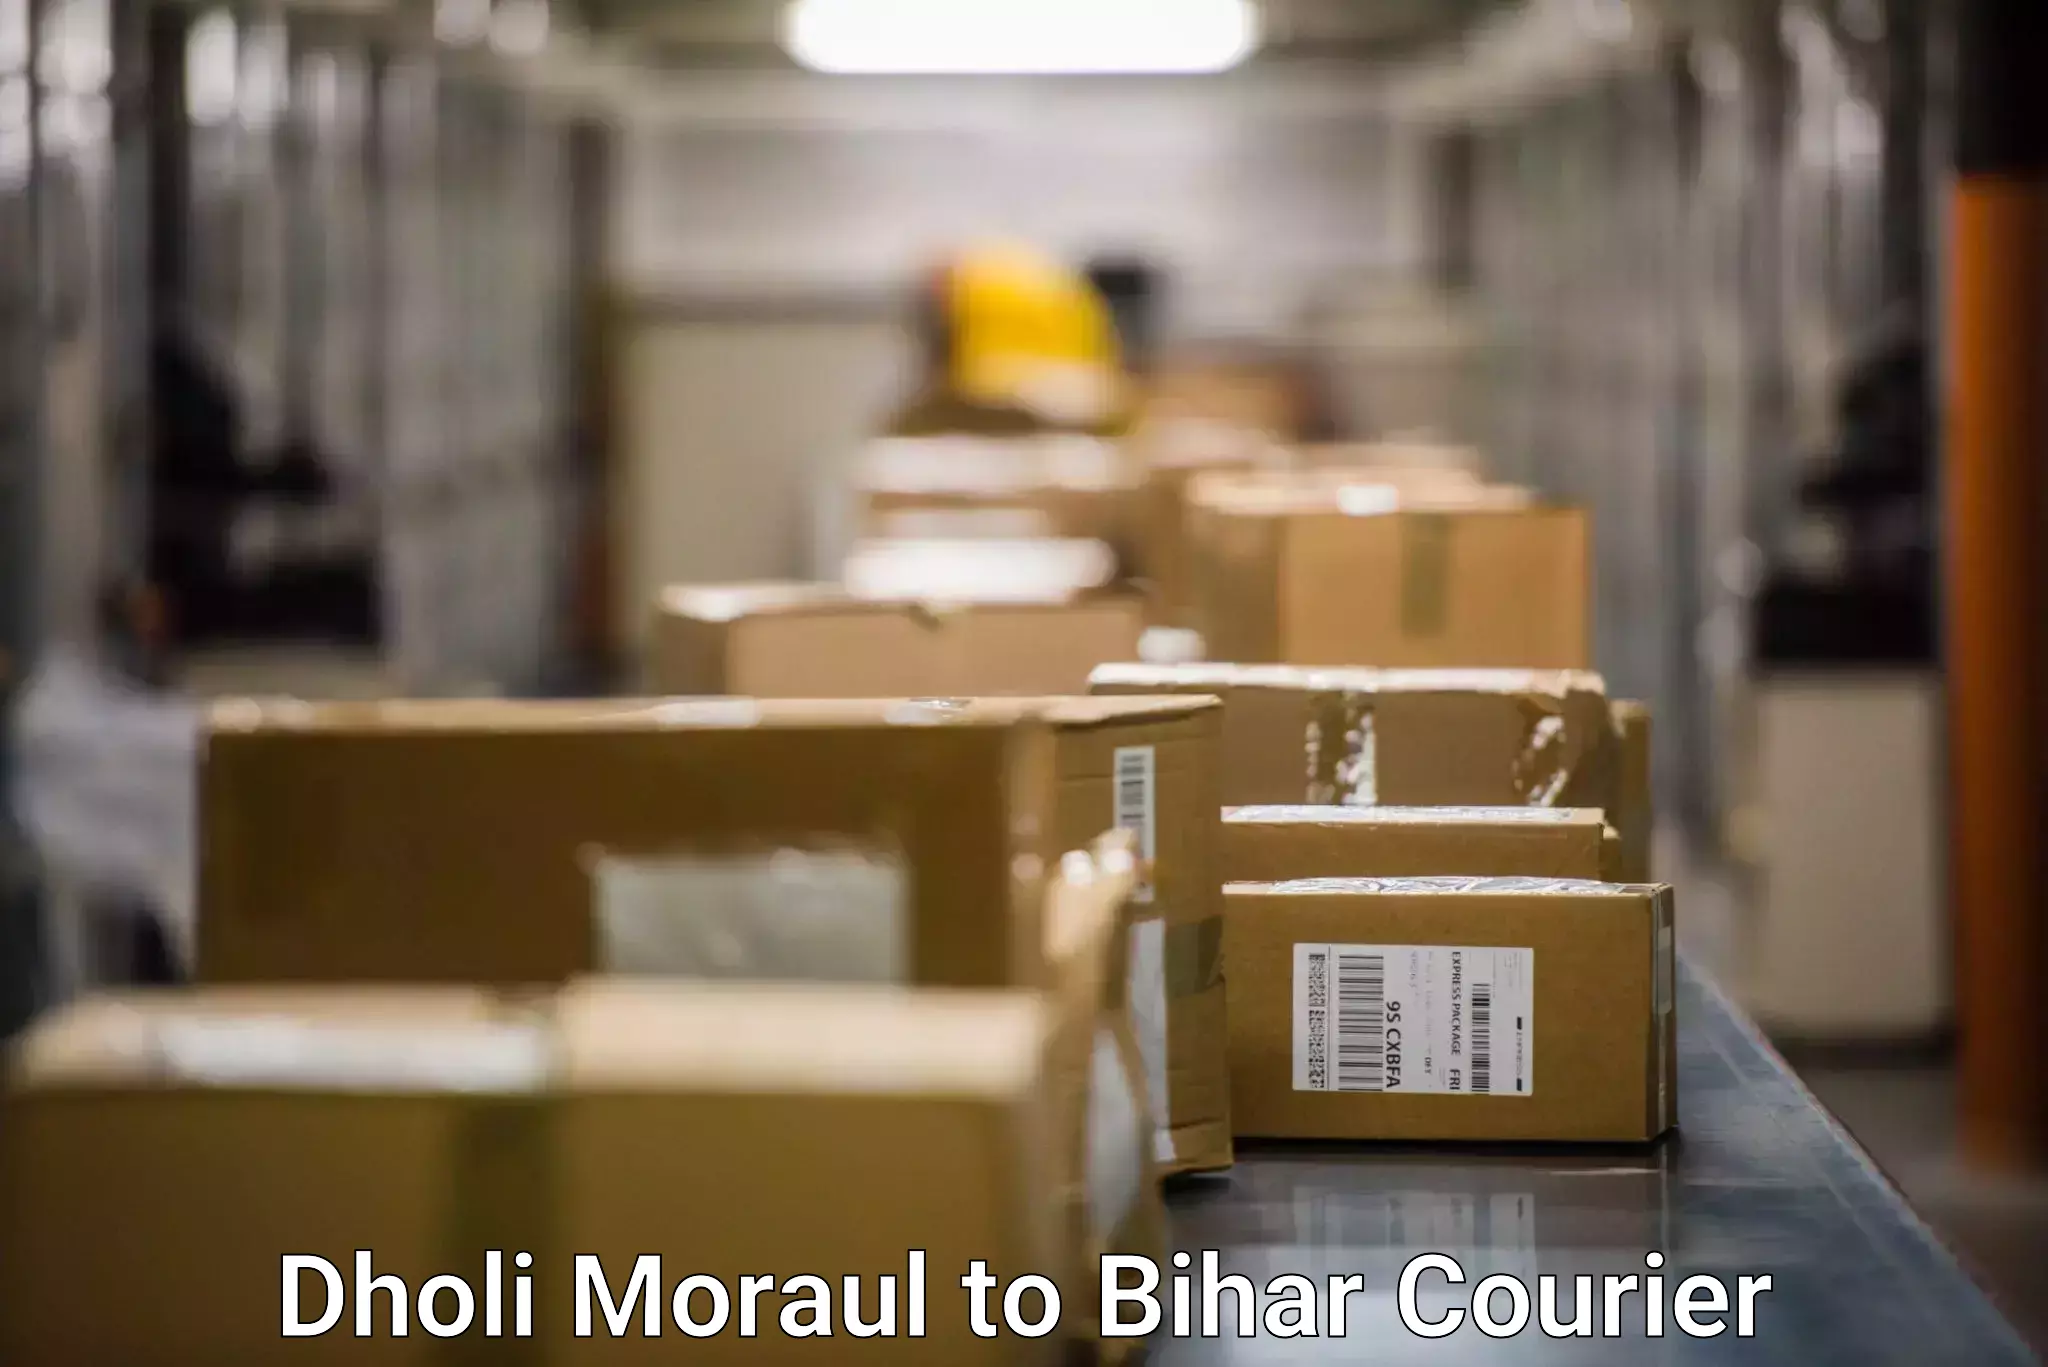 Courier service booking Dholi Moraul to Kahalgaon